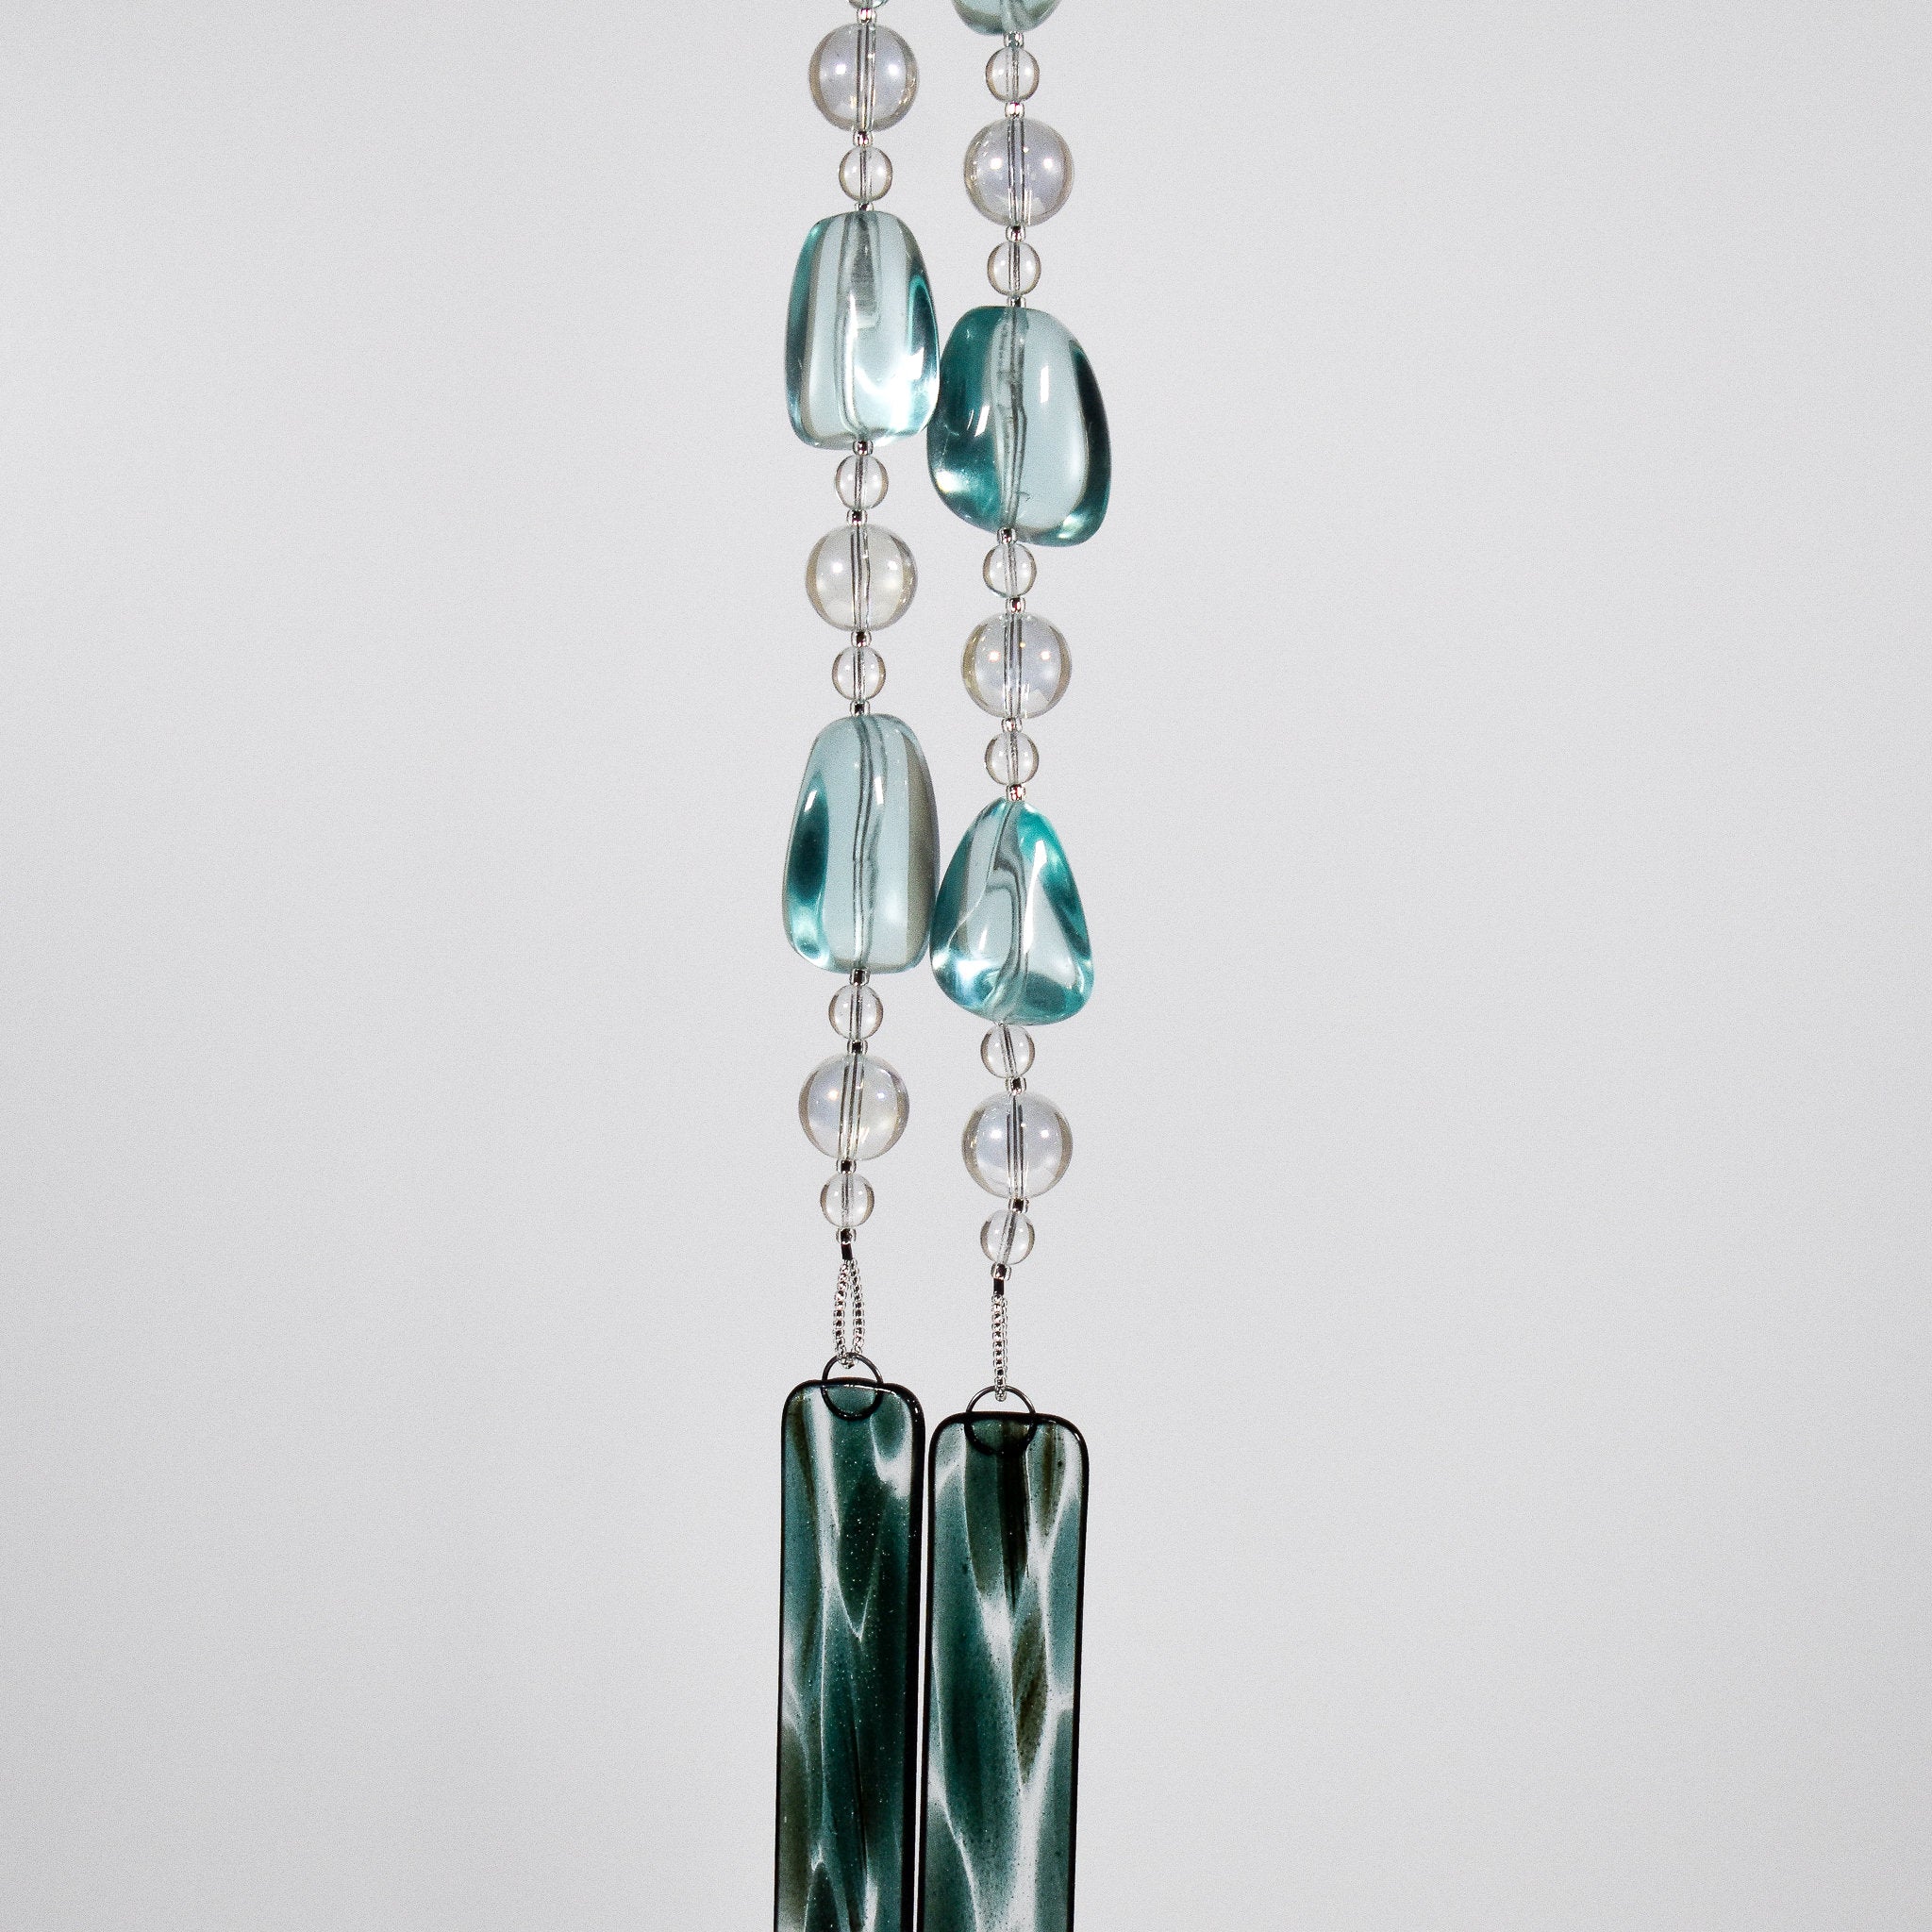 Long Glass Sun-Catcher Wind Chime with Aqua Glass Beads and Fused Glass